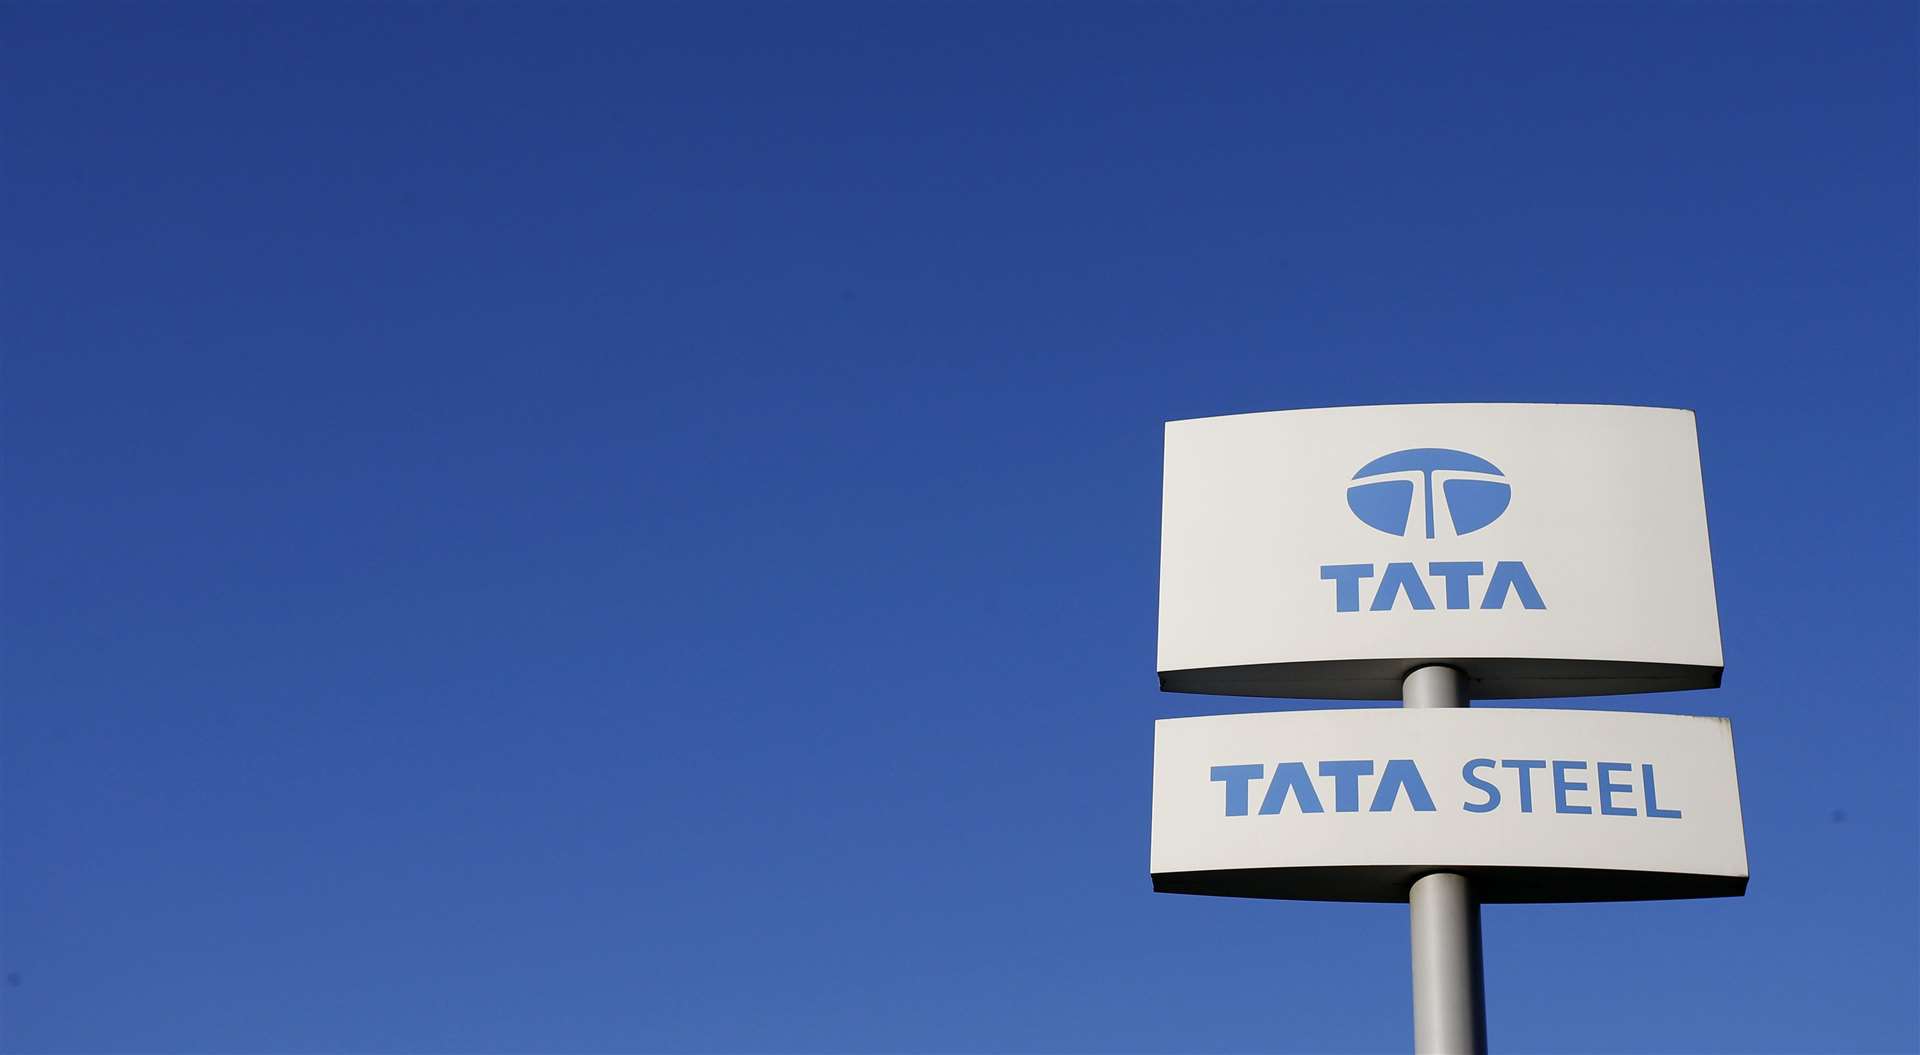 Tata Steel employs around 8,000 people across the UK (Peter Byrne/PA)